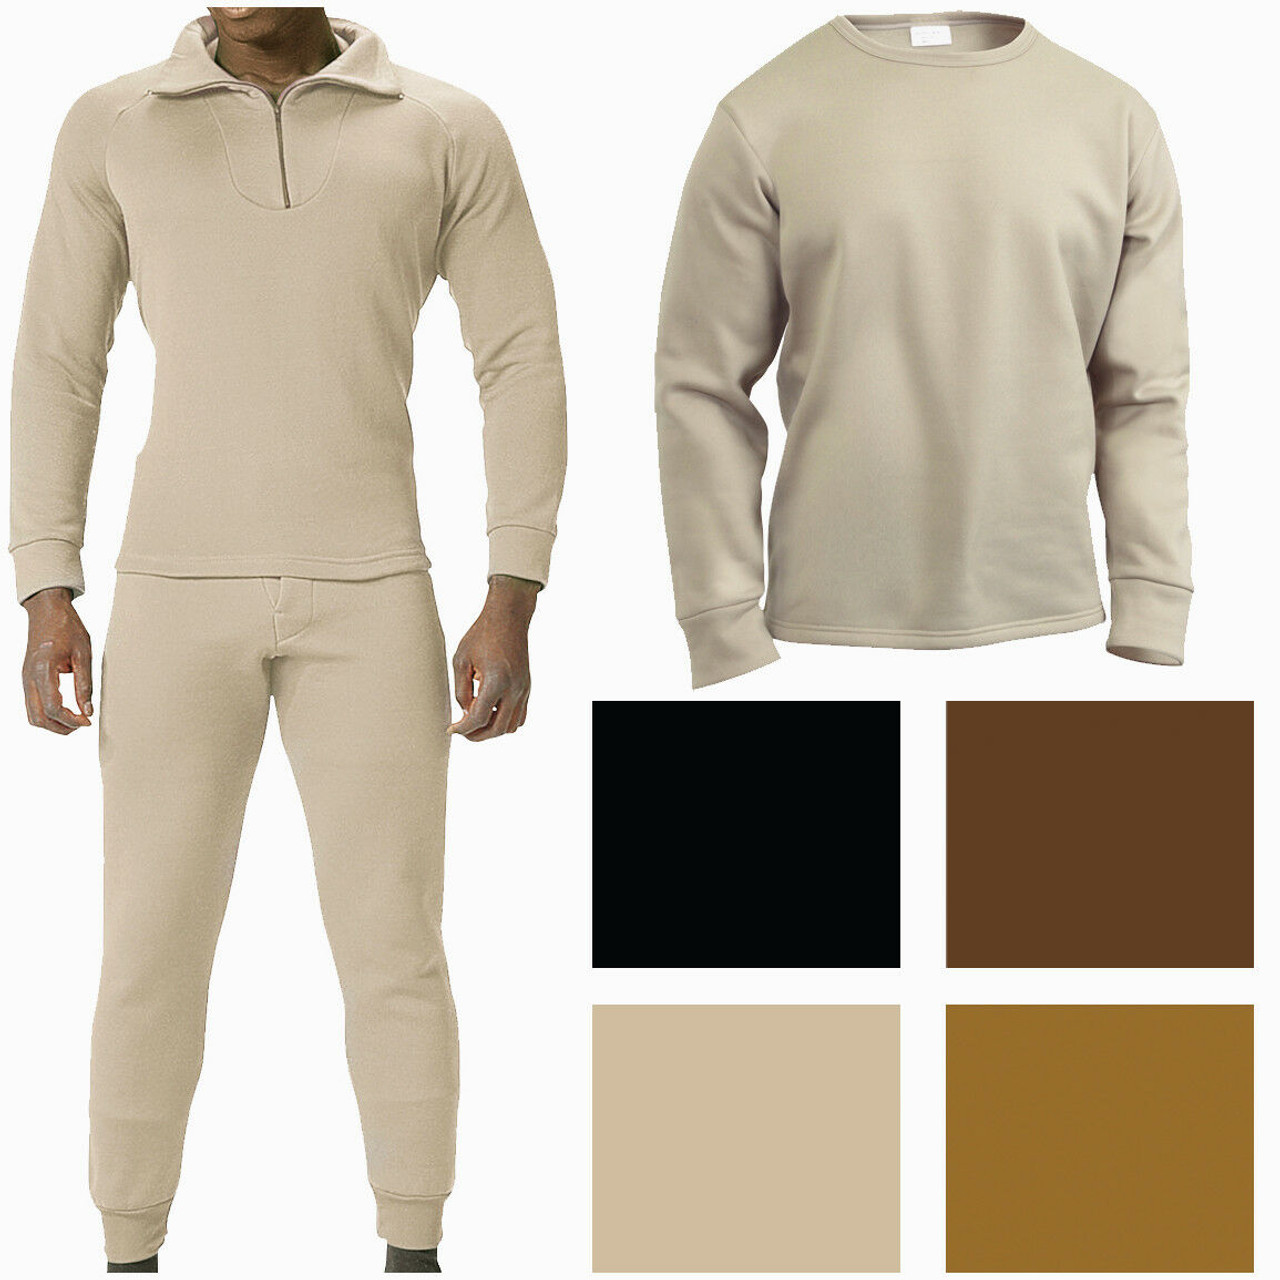 PolyPro Long underwear set SMALL, Army Issue